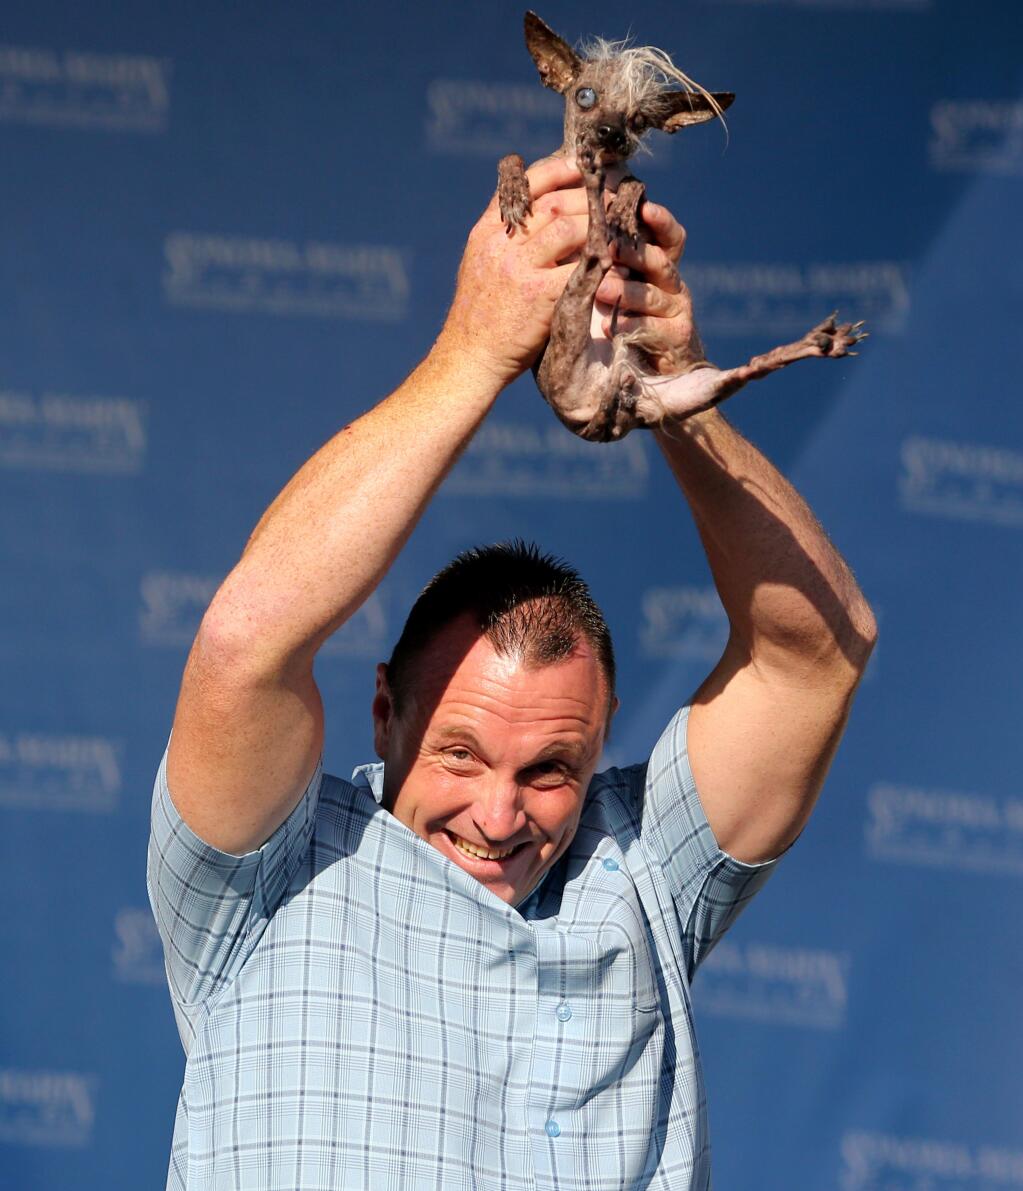 Second place winner Jason Wurtz holds up SweePee Rambo of Encino, California, during 'The World's Ugliest Dog Contest,' held at the Sonoma-Marin Fair in Petaluma Friday, June 26, 2015. The winner of this year's contest was 10-year-old pit/Dutch shepherd mix Quasi Modo from Loxahatchee, Florida, who was born with multiple birth defects to the spine. Second place went to SweePee Rambo, a Chinese Crested Chihuahua. (CRISTA JEREMIASON / The Press Democrat)